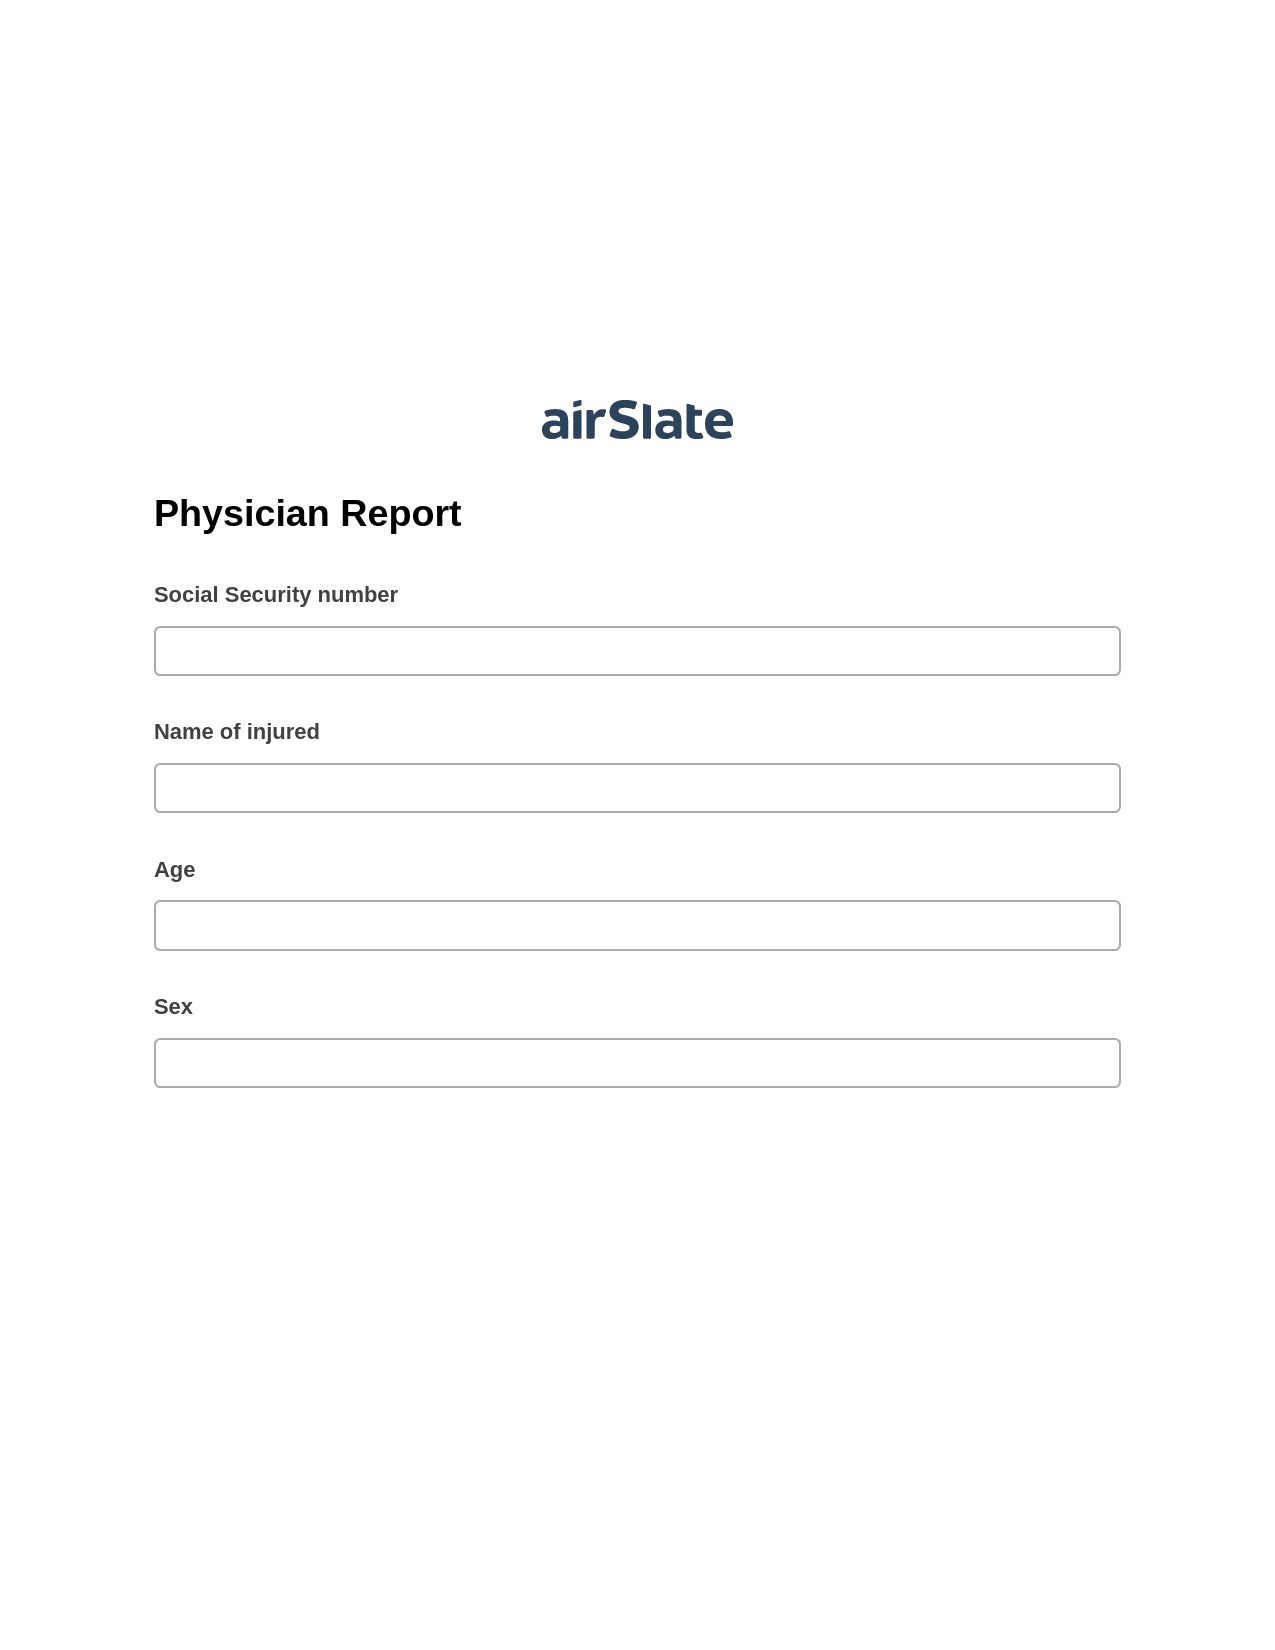 Physician Report Pre-fill from CSV File Bot, Send a Slate to MS Dynamics 365 Contact Bot, Archive to OneDrive Bot